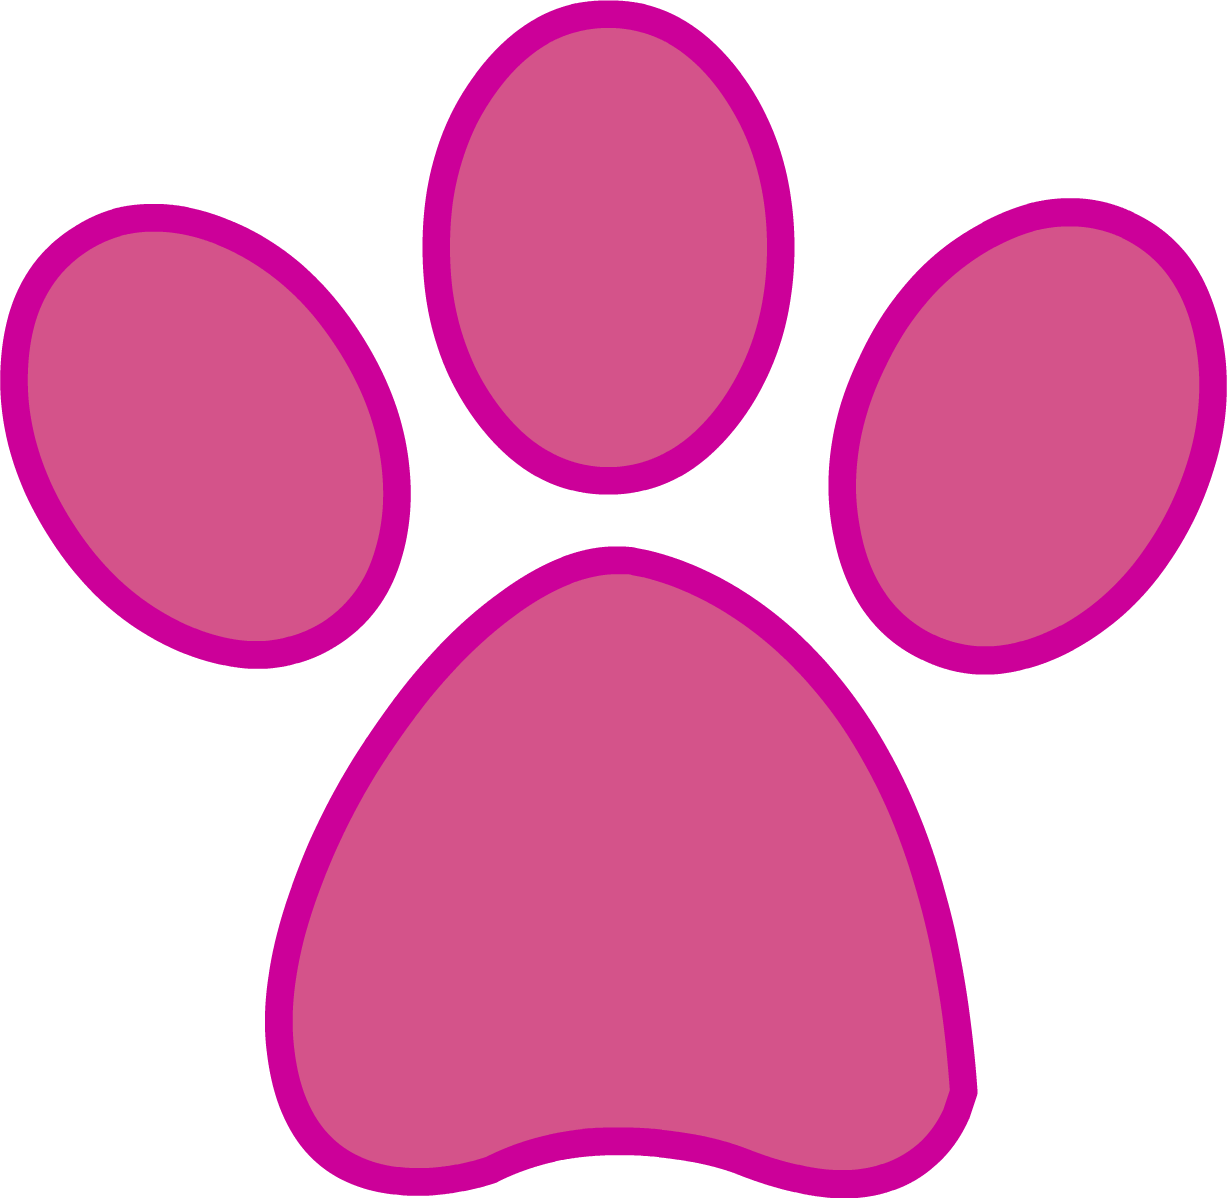 Pink Panther Paw Free Cliparts That You Can Download To You Computer